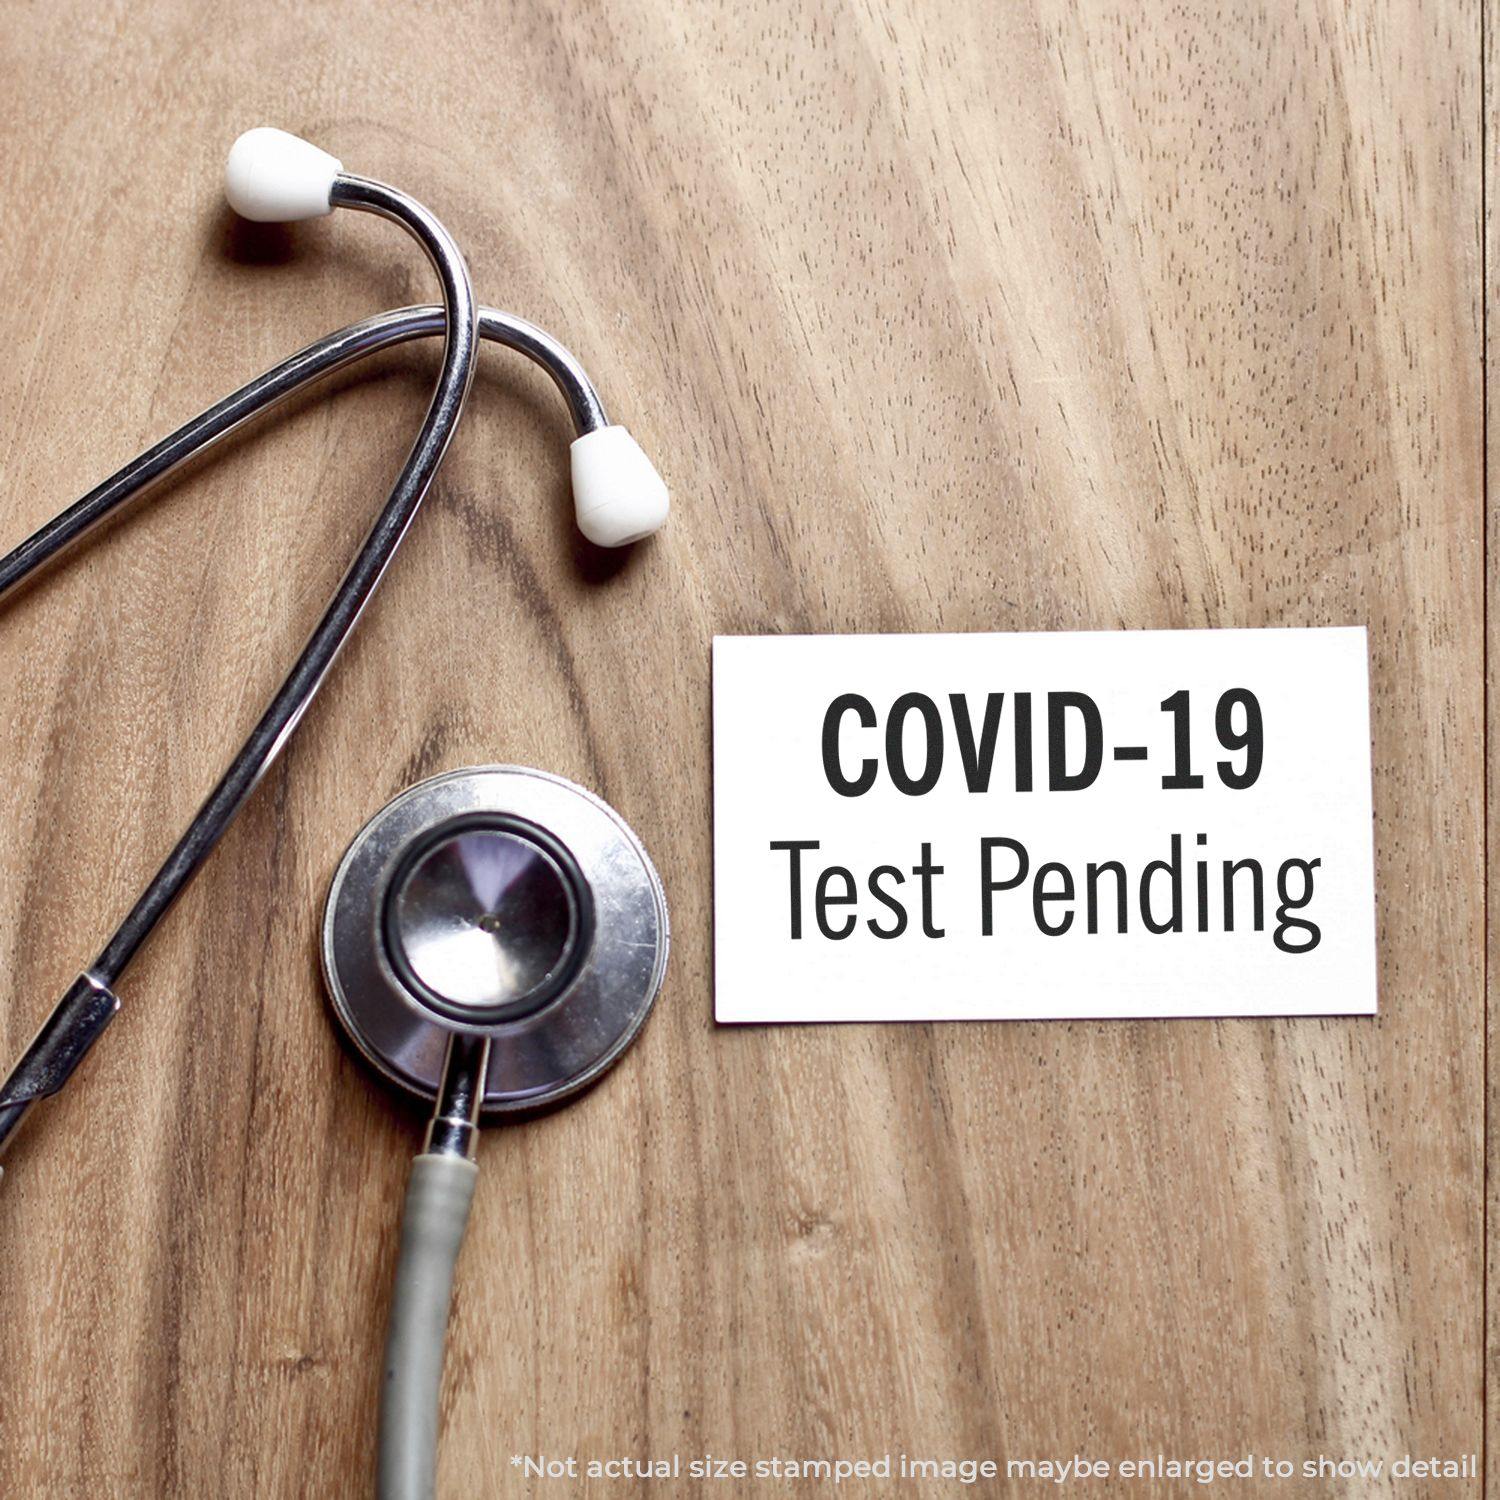 A stock office pre-inked stamp with a stamped image showing how the text "COVID-19 Test Pending" is displayed after stamping.